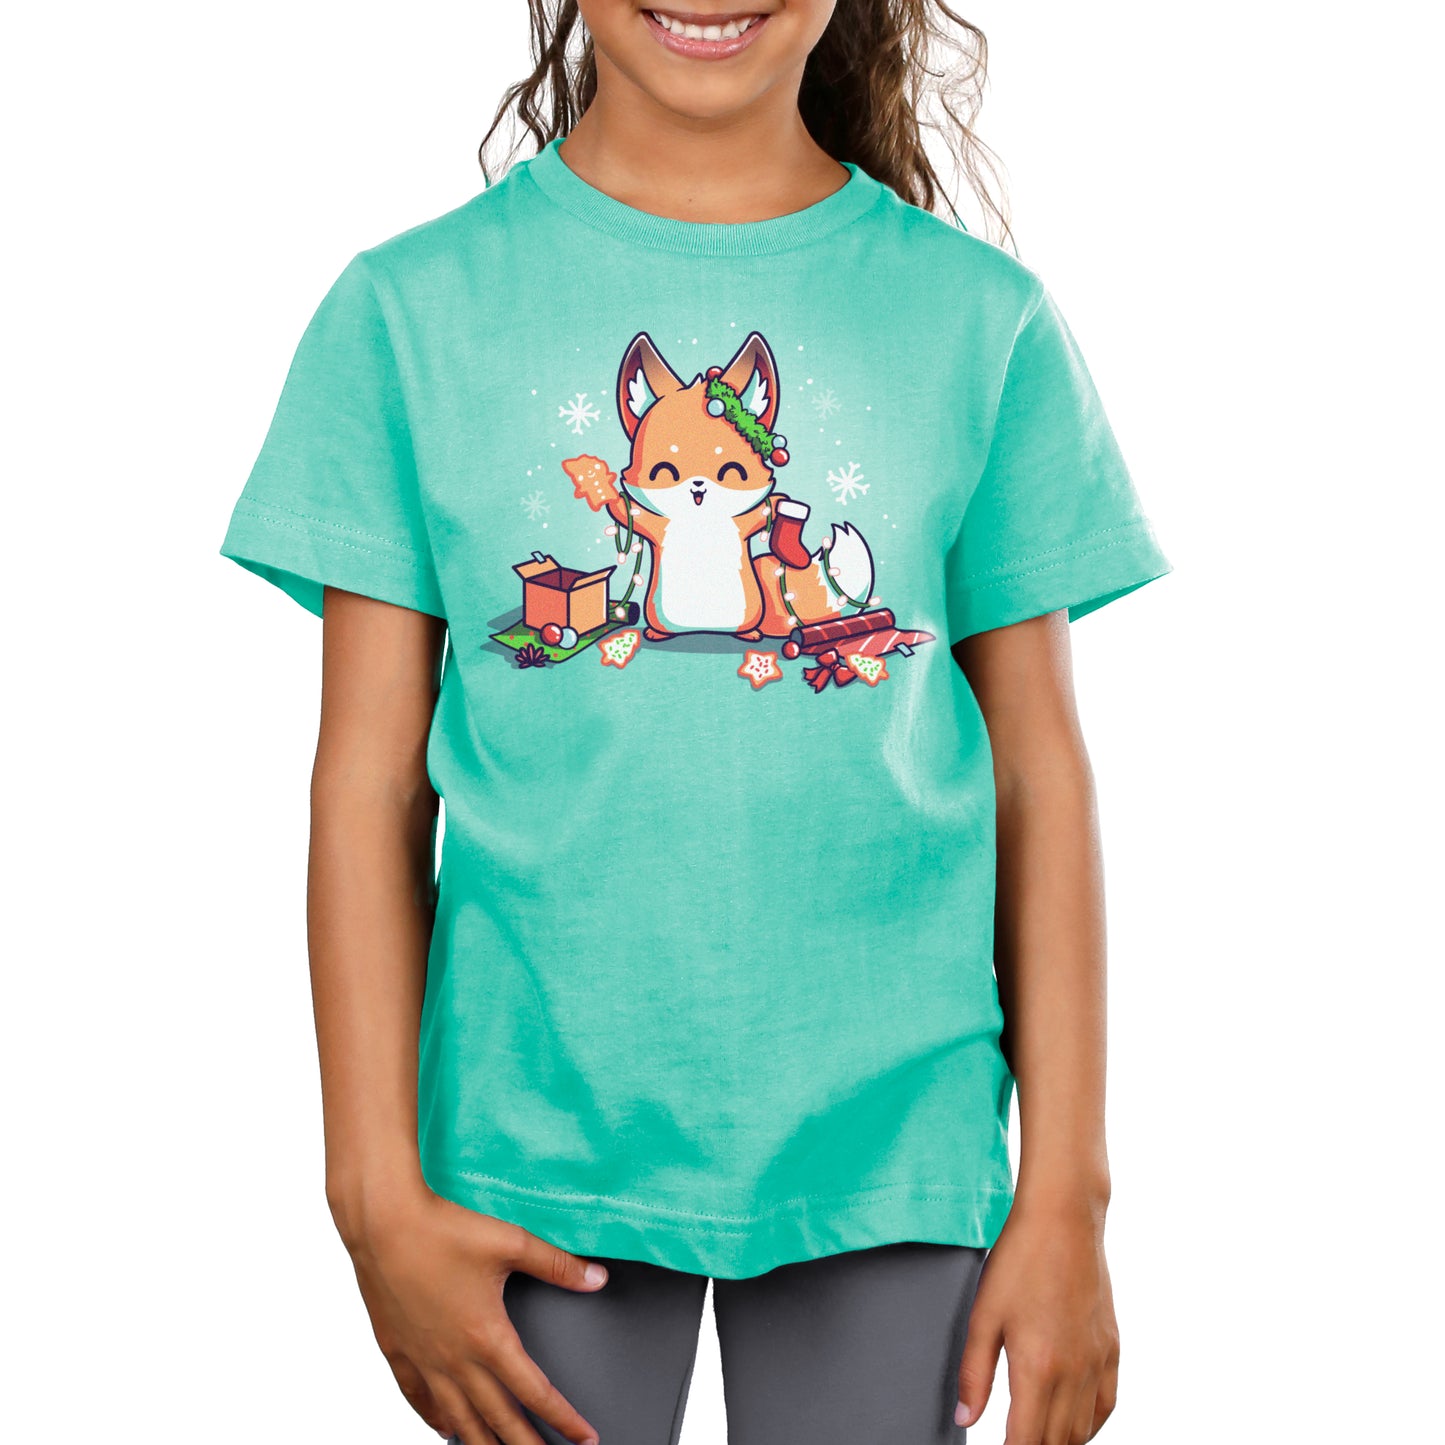 A girl enjoying comfort in her green "It's That Time of Year" t-shirt by TeeTurtle with a fox on it while engaging in holiday activities.